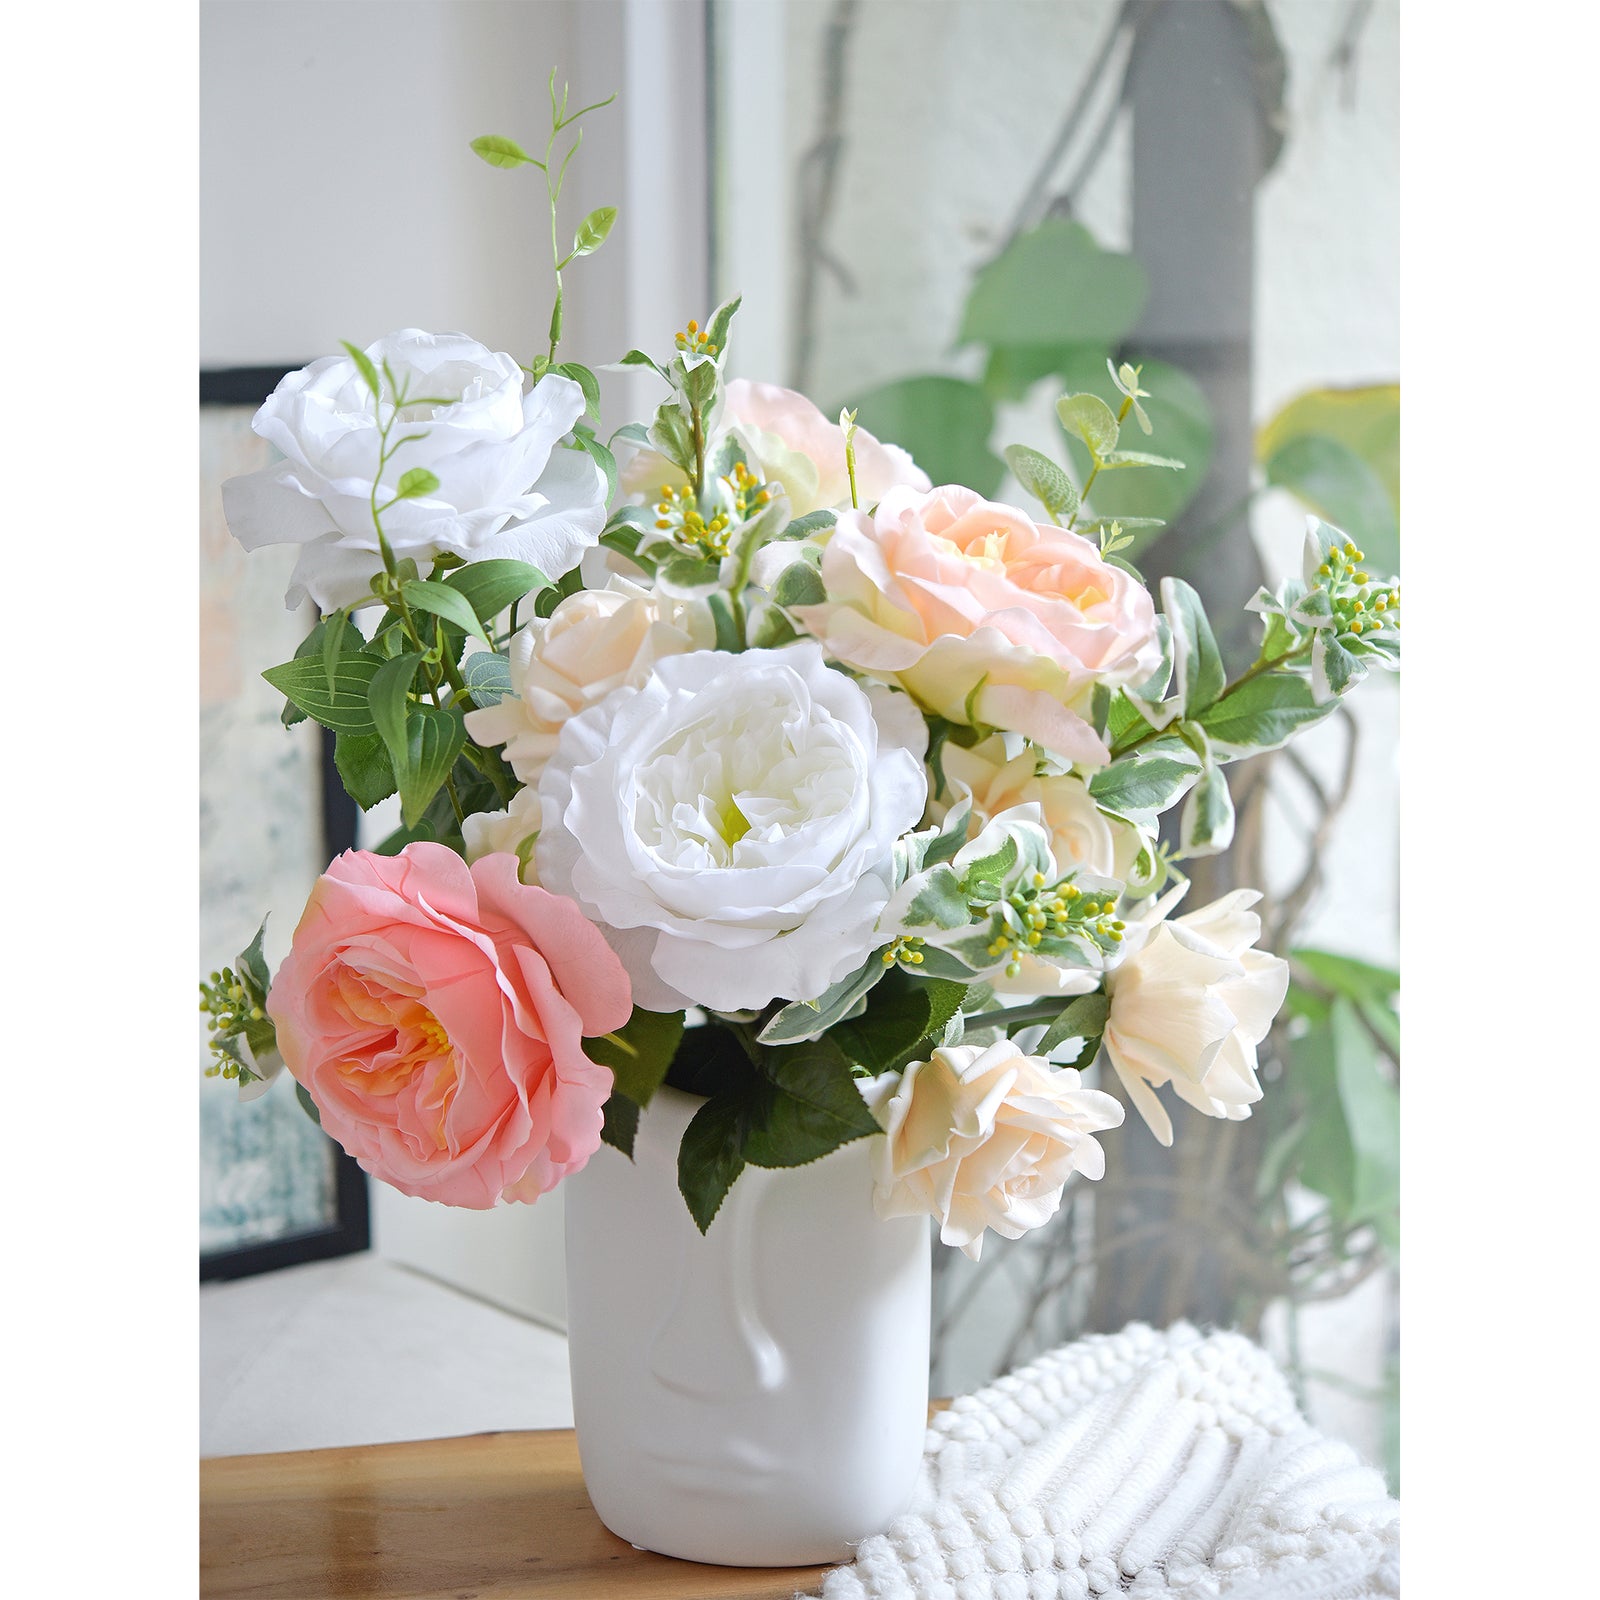 White Smoke Real Touch Garden Roses Large Blooms 2 Long Stems